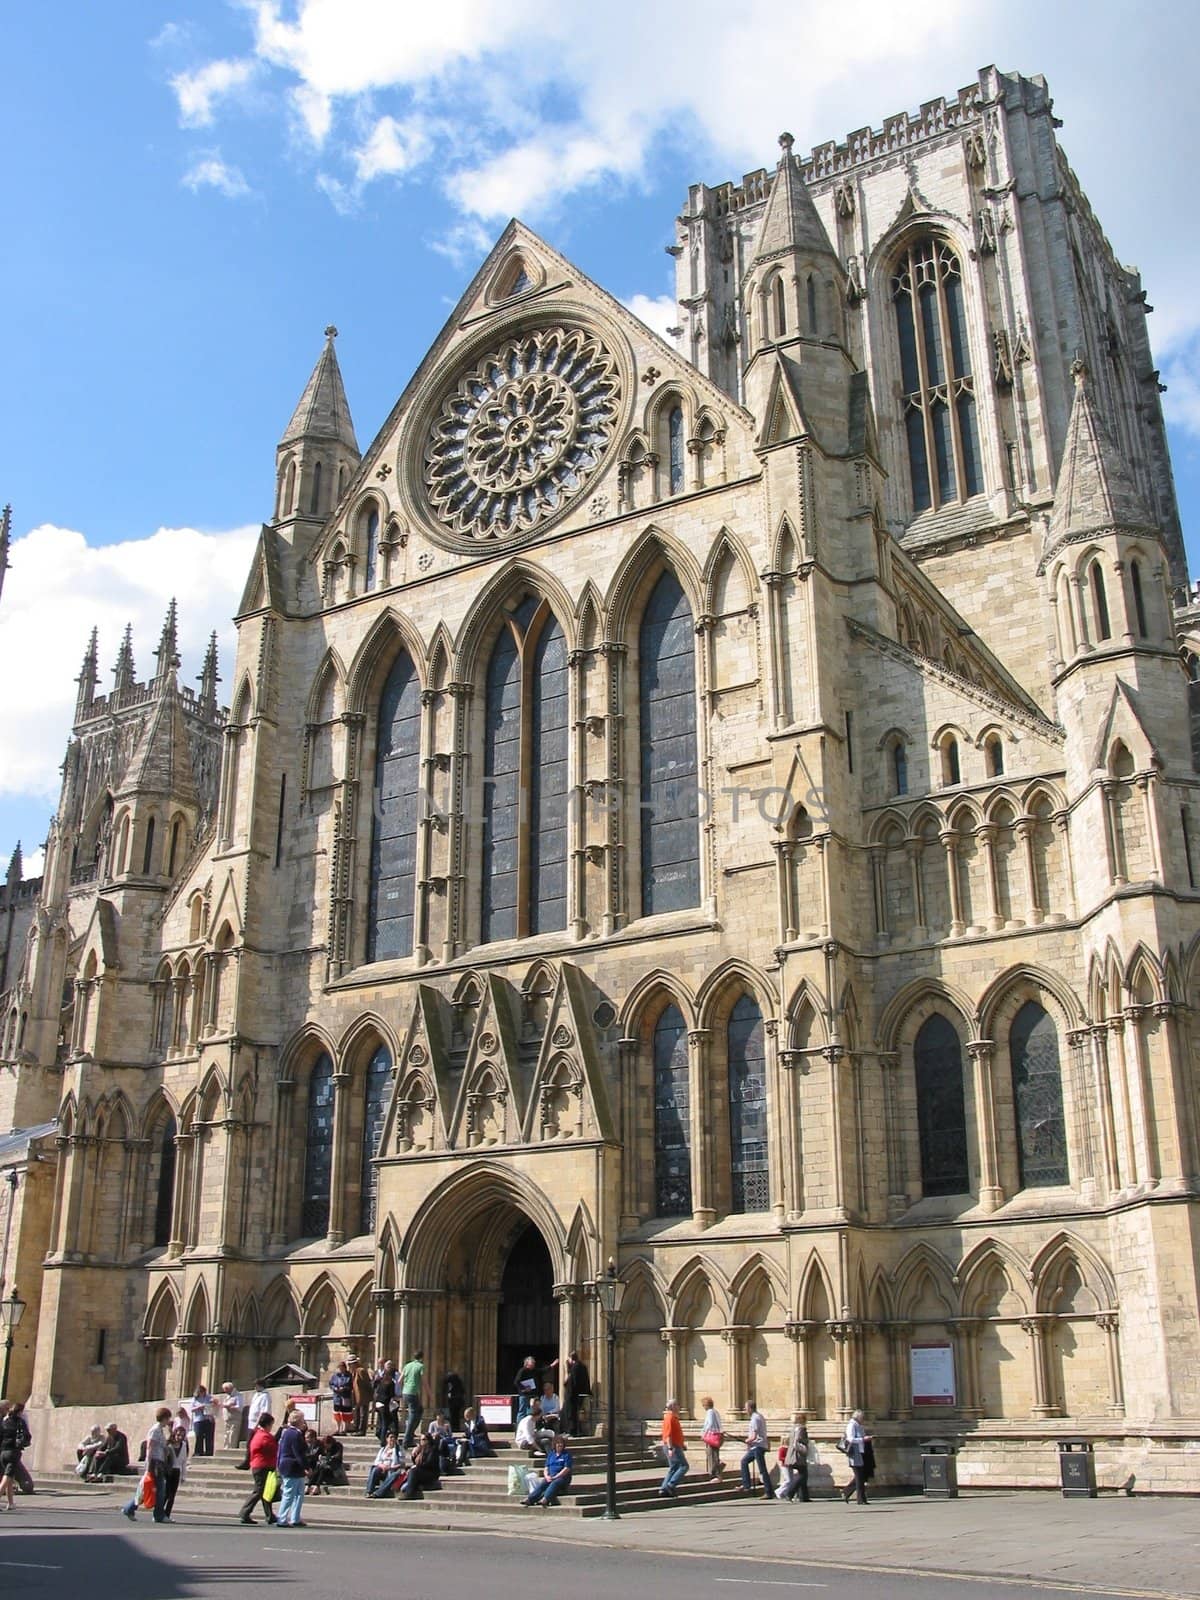 A famous cathedral in england